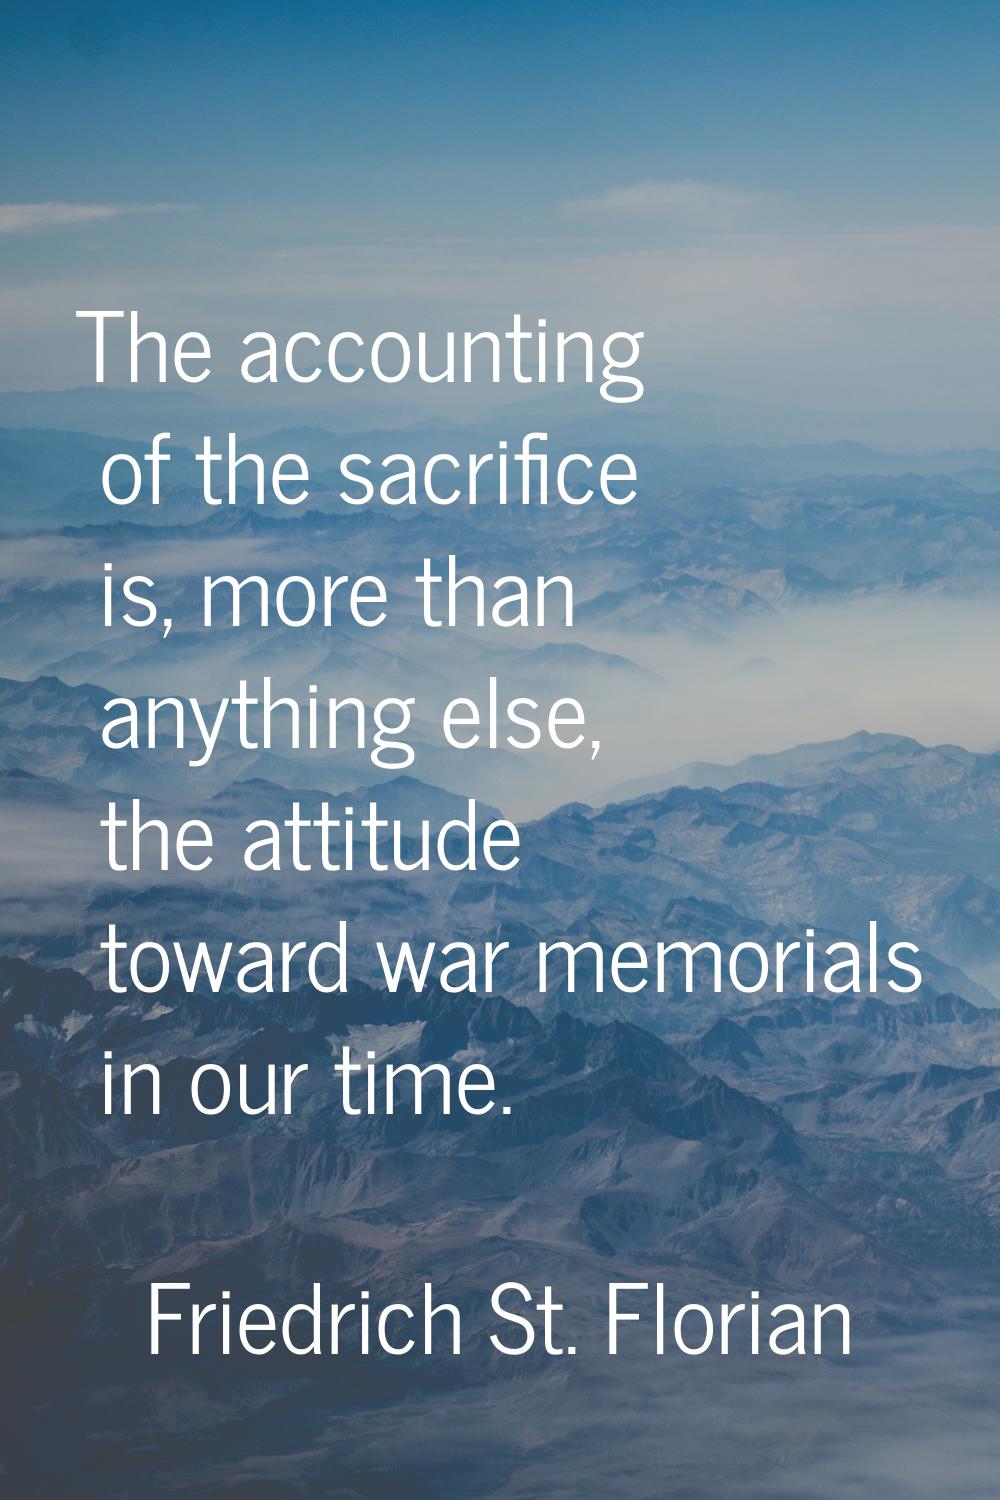 The accounting of the sacrifice is, more than anything else, the attitude toward war memorials in o